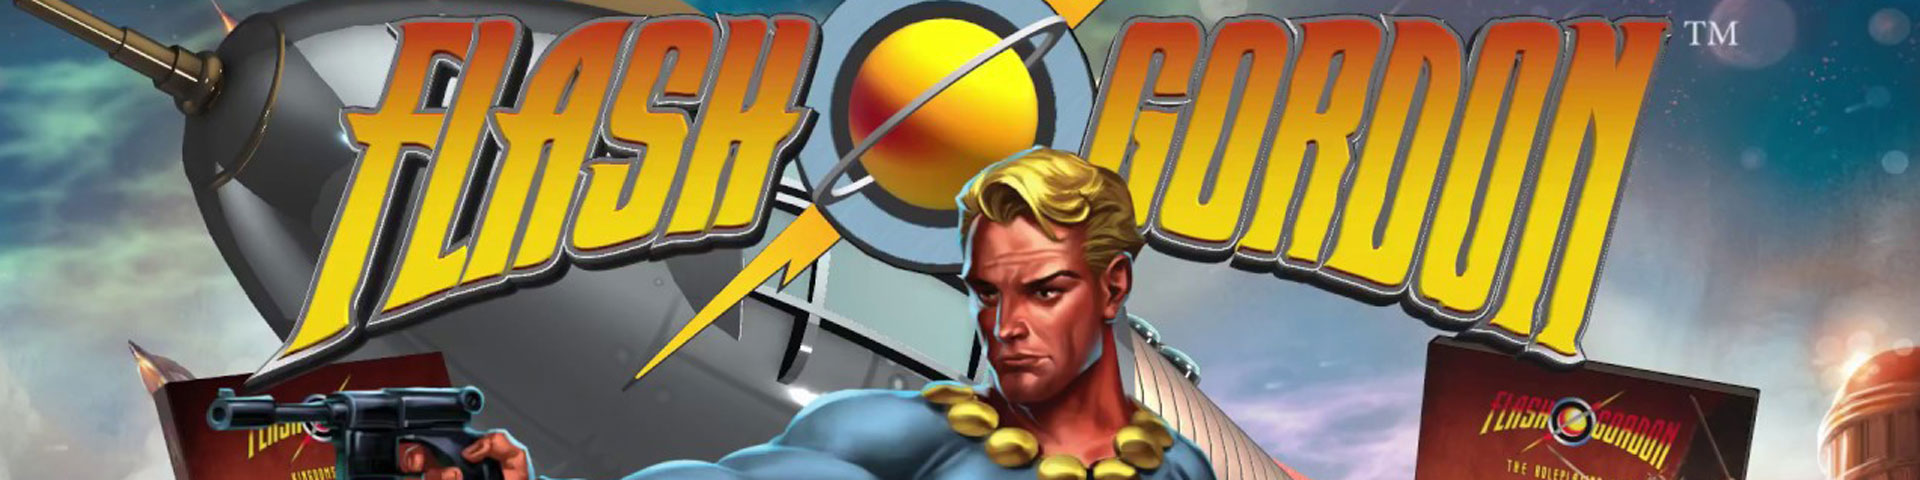 Pulp serial hero Flash Gordon stands ready for battle; the logo bearing his name appears behind him.